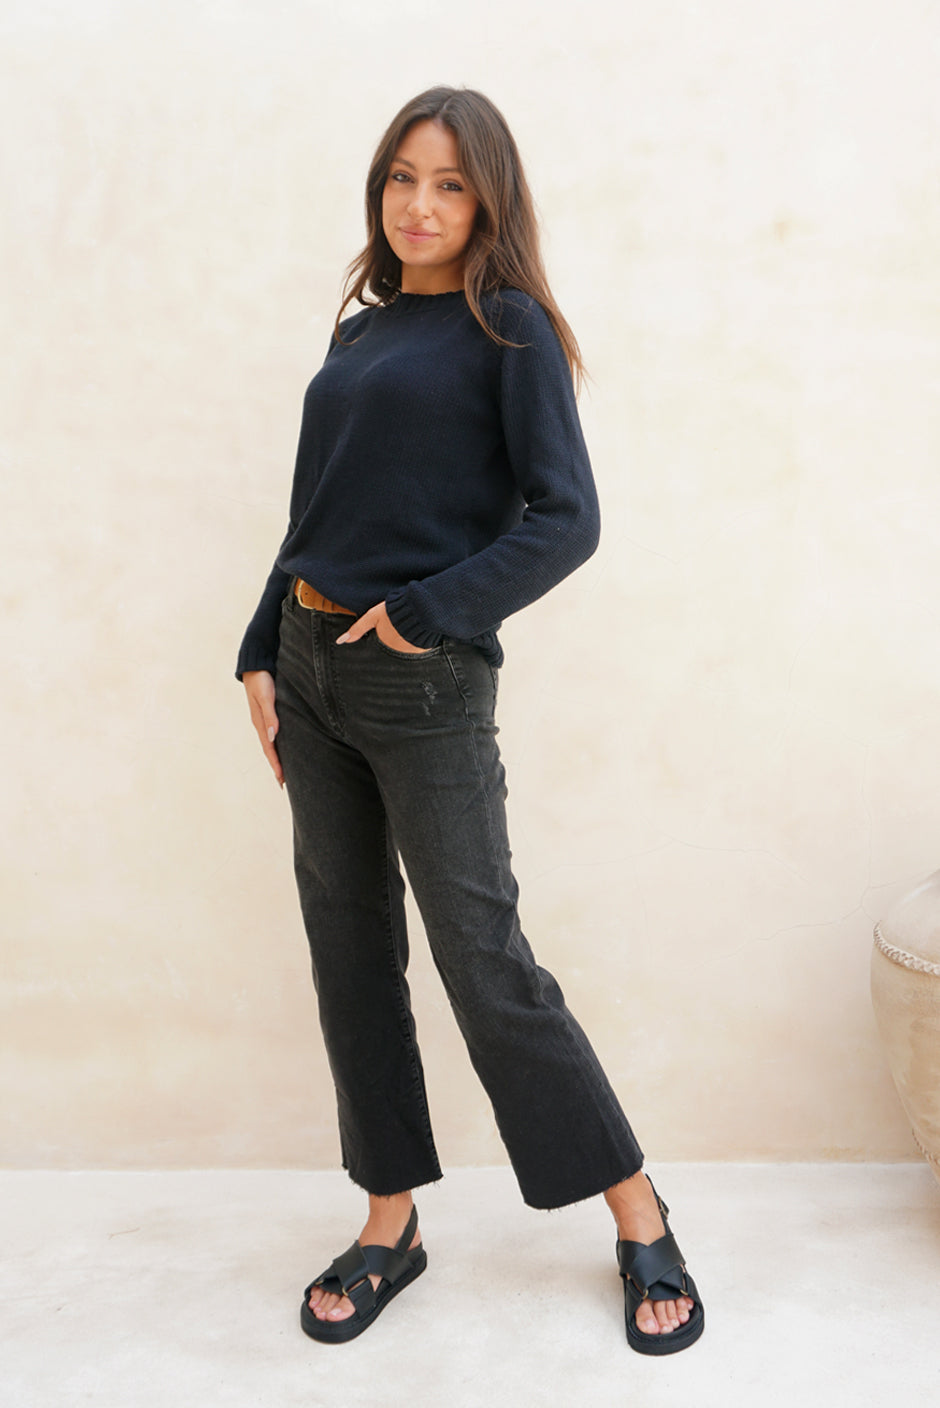 ethically made cotton navy blue crewneck sweater